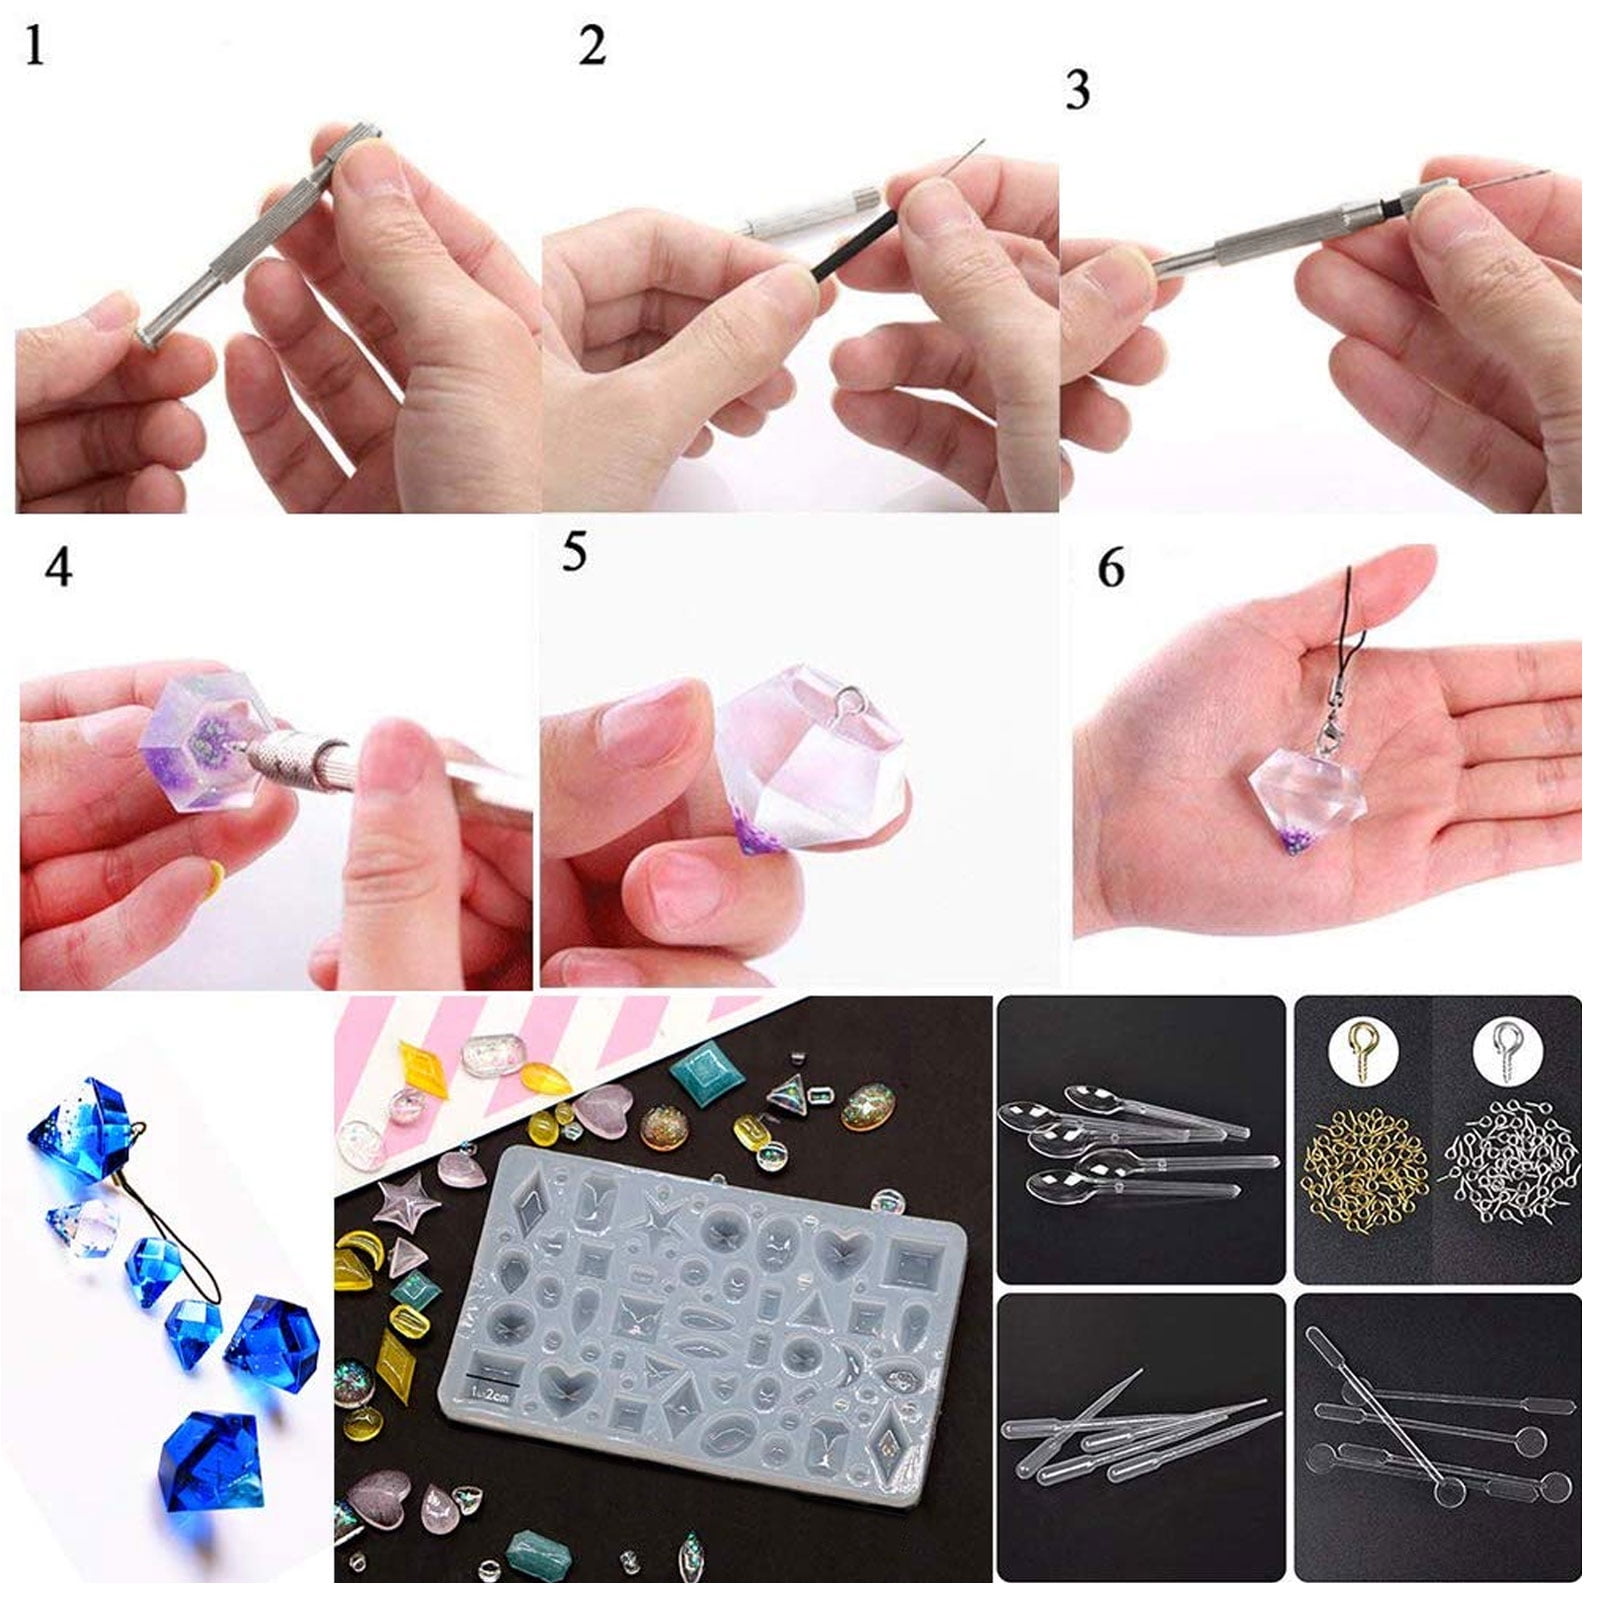 Bestonzon 12pcs Resin Molds Silicone Epoxy Resin Molds Resin Charm Making Mold Tool